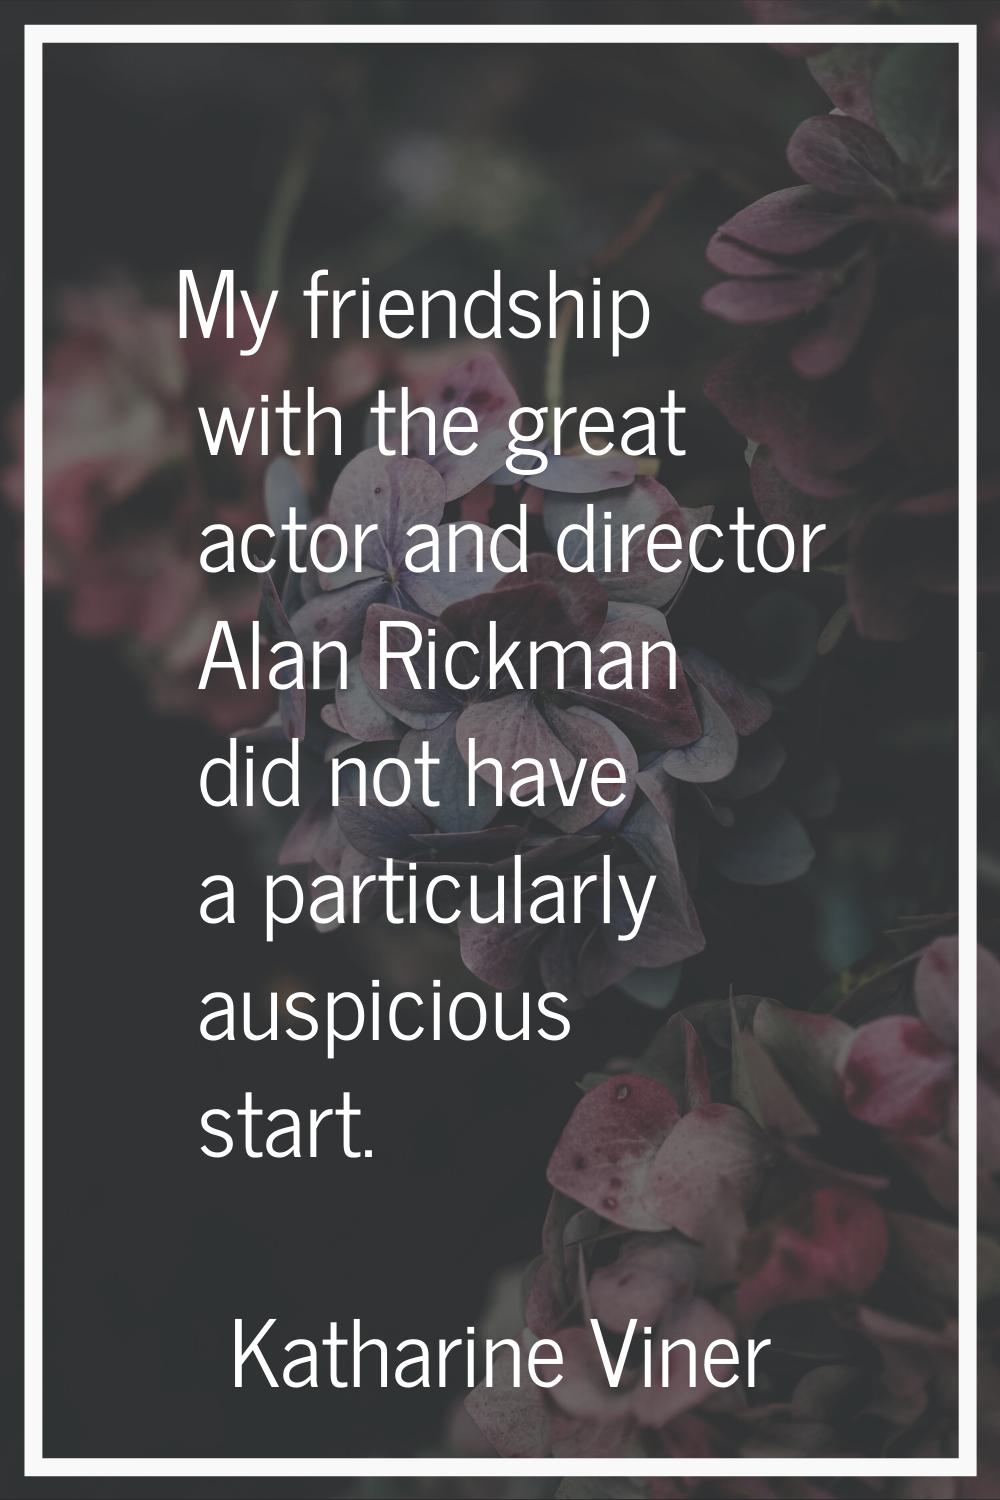 My friendship with the great actor and director Alan Rickman did not have a particularly auspicious